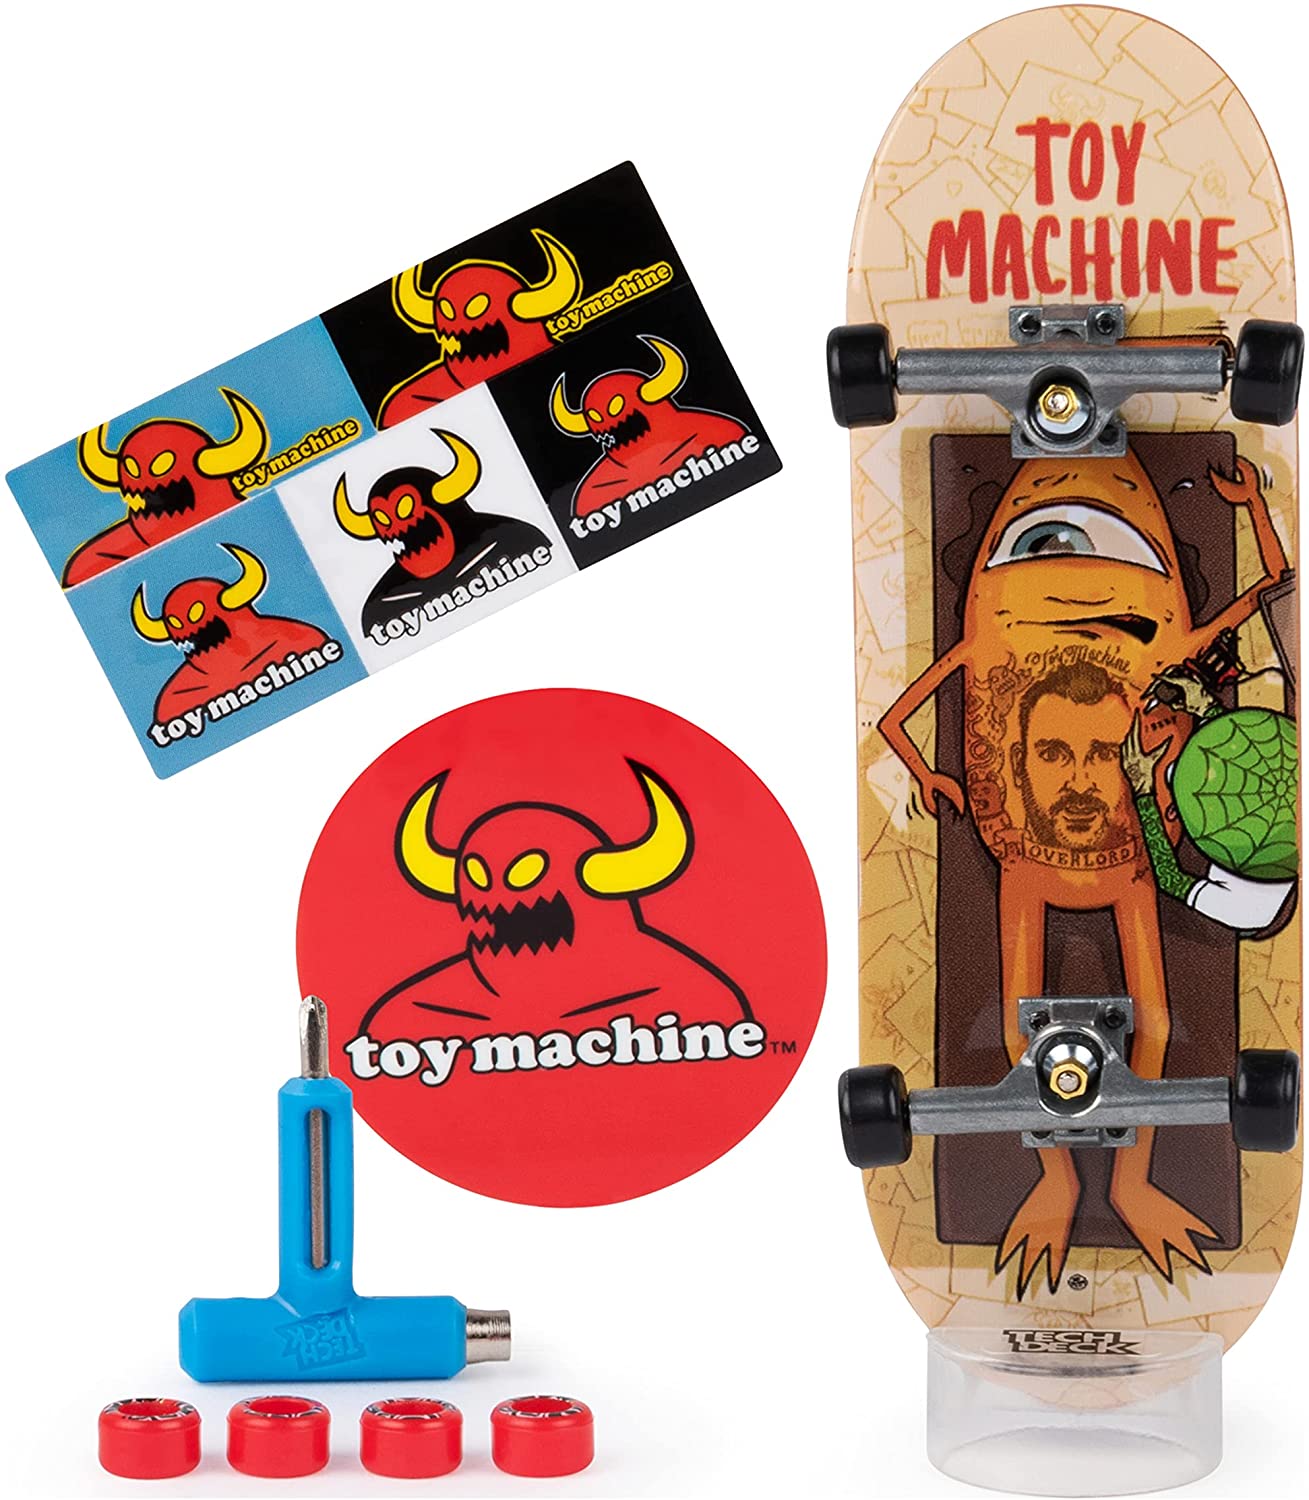 Tech Deck, 96mm Throwback Series Finger Skateboard (Styles May